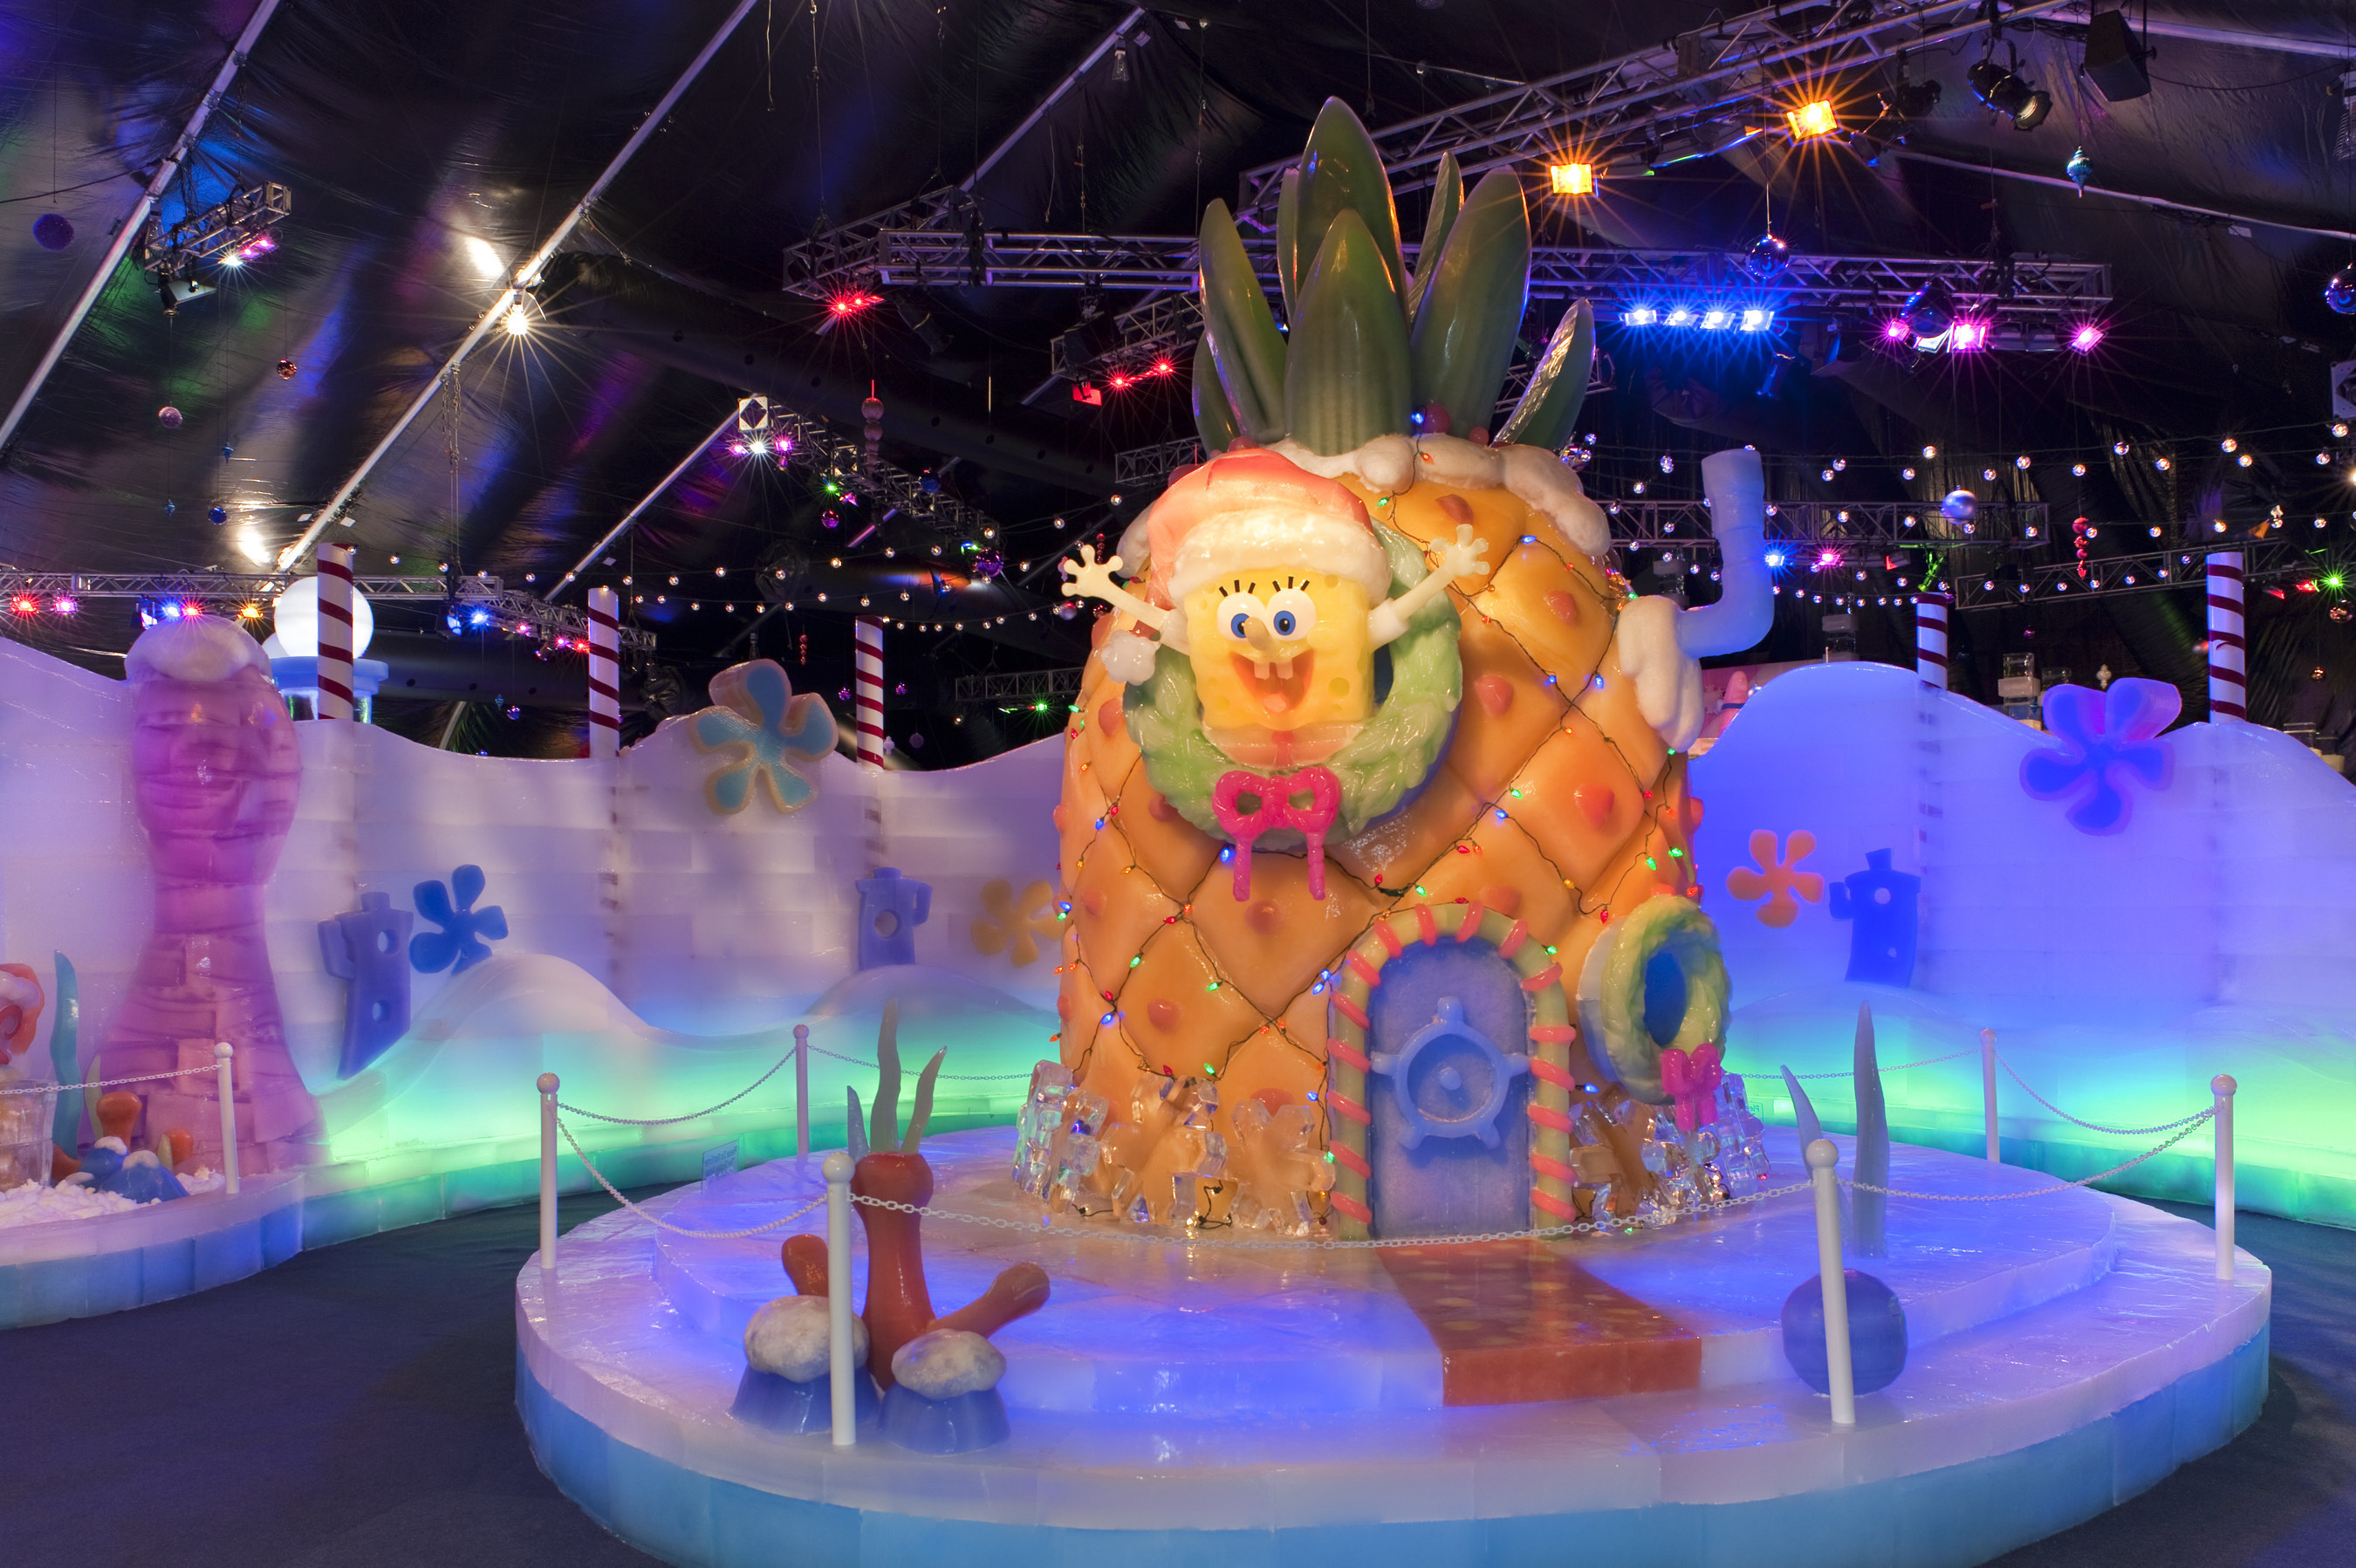 Brand New ICE LAND Ice Sculptures With Spongebob Squarepants To Debut